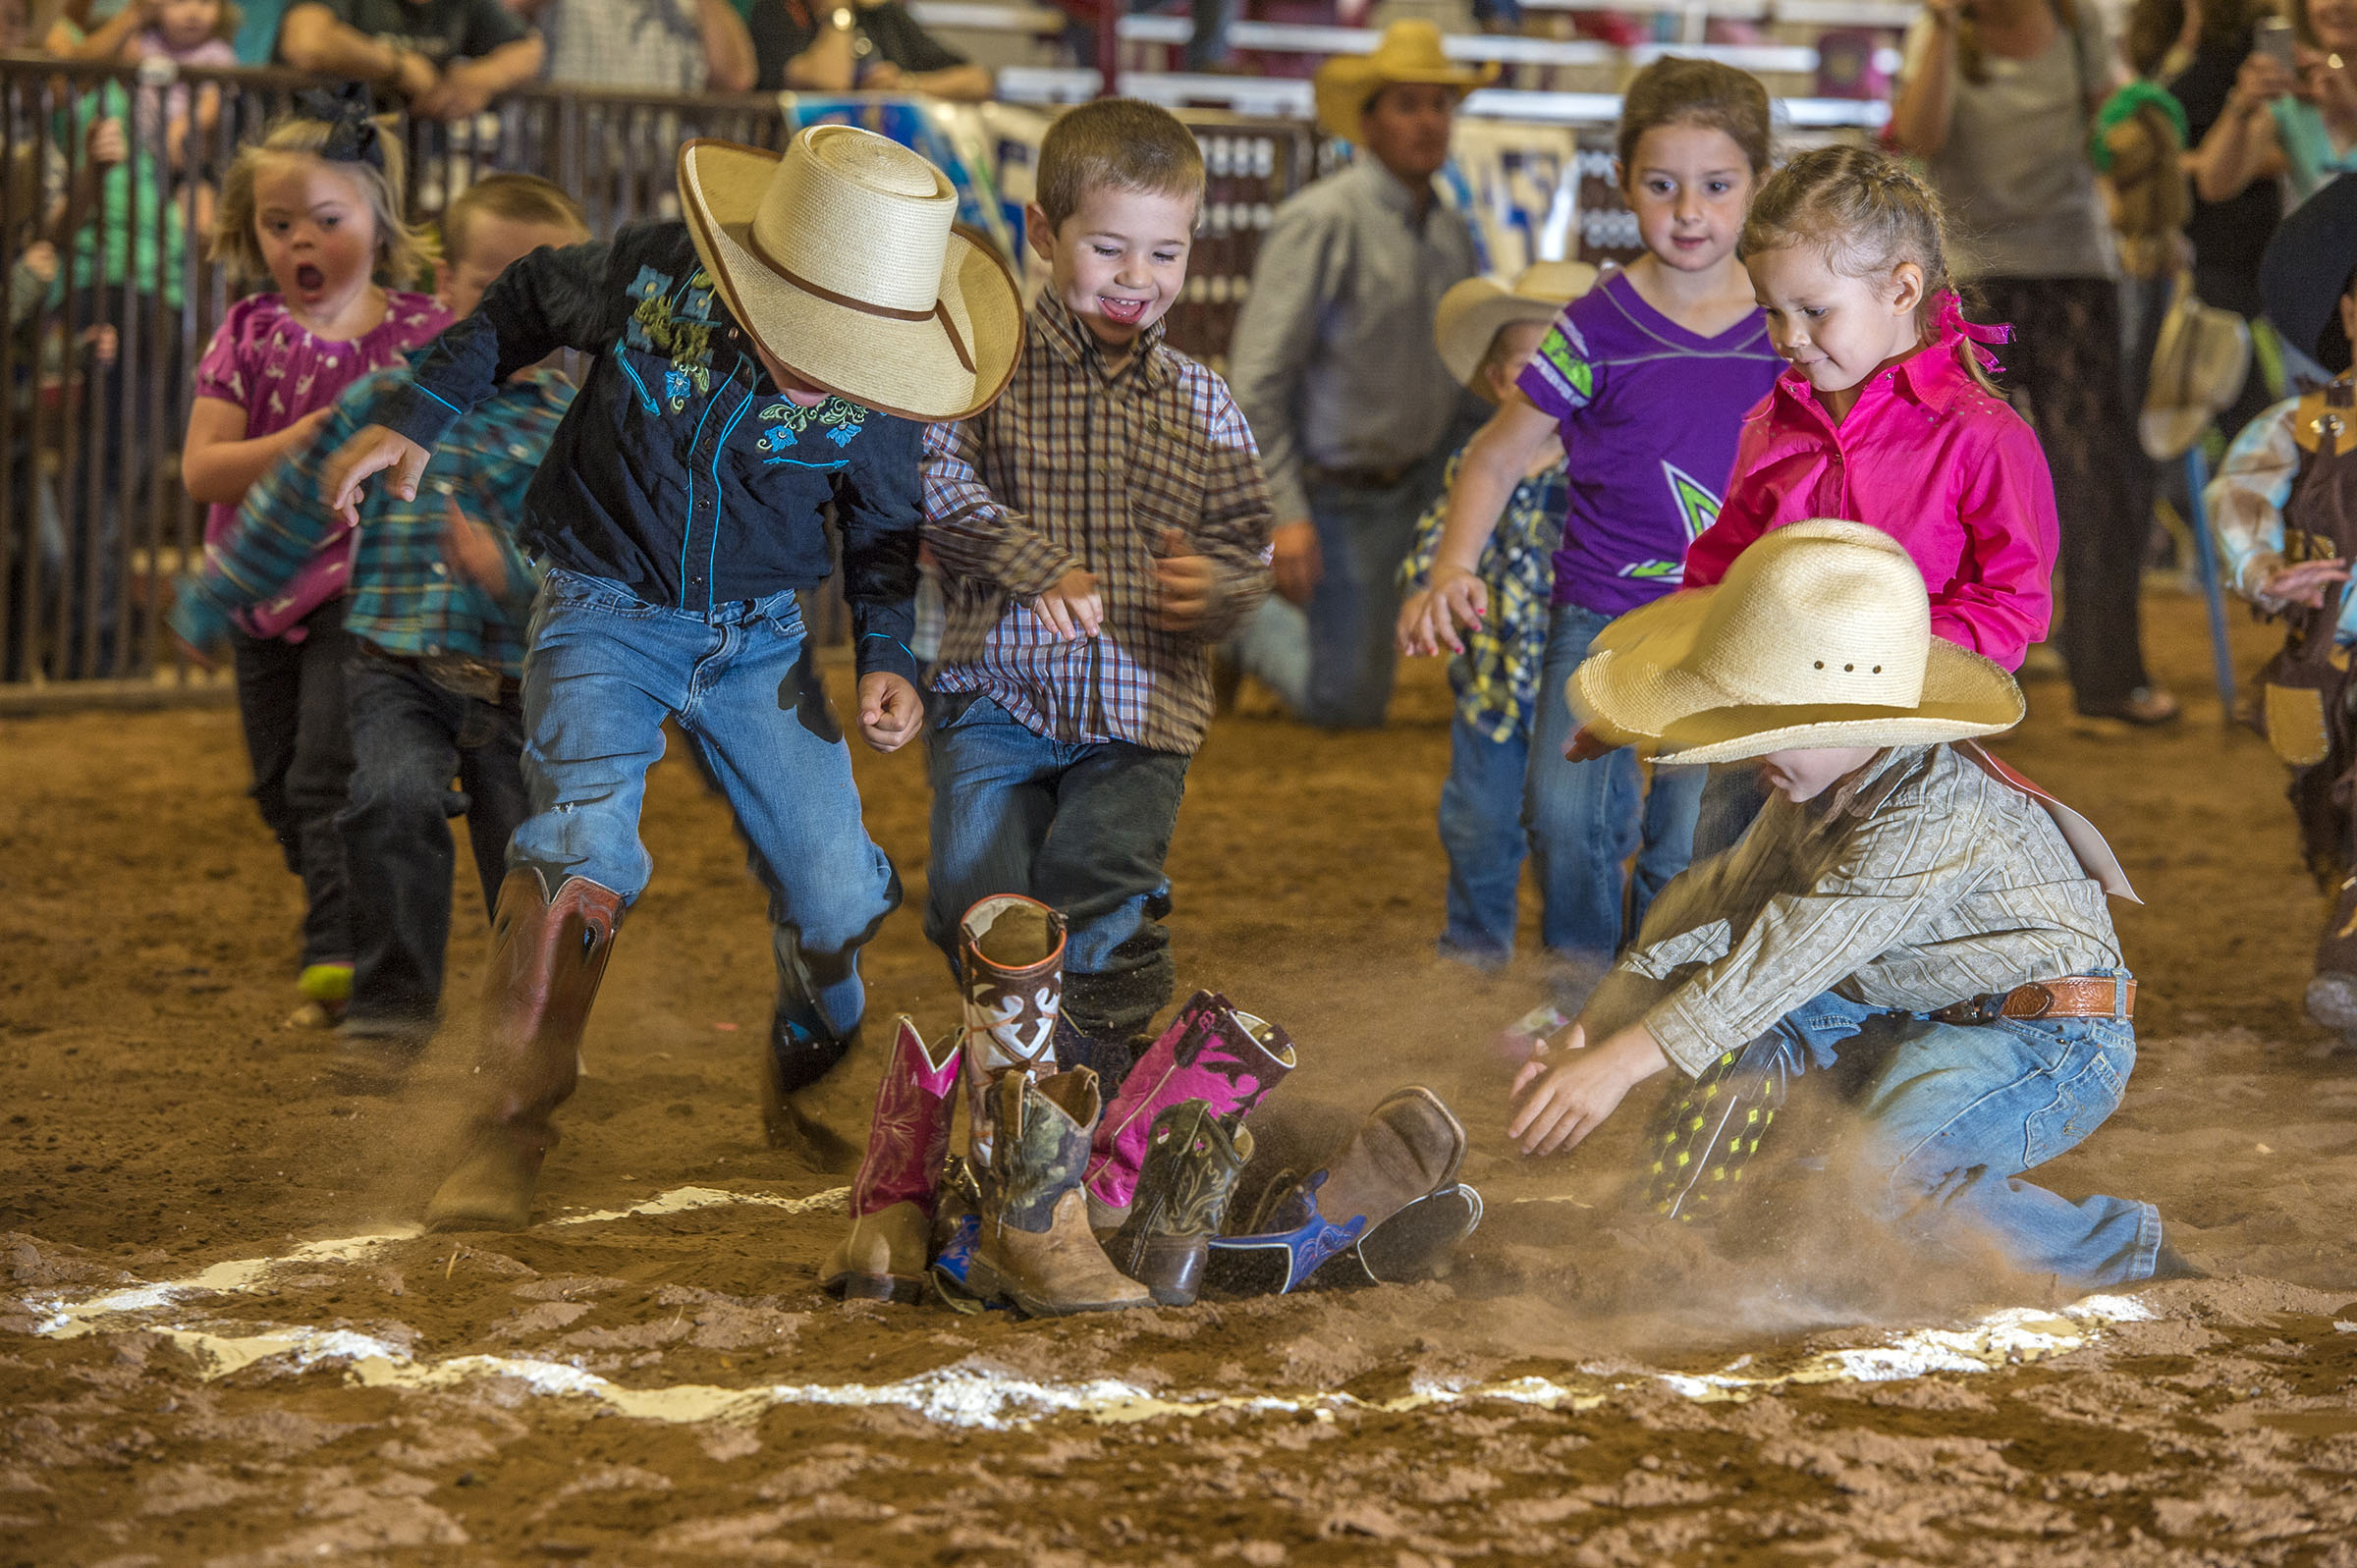 A group of children grab for boots in a dirt arena